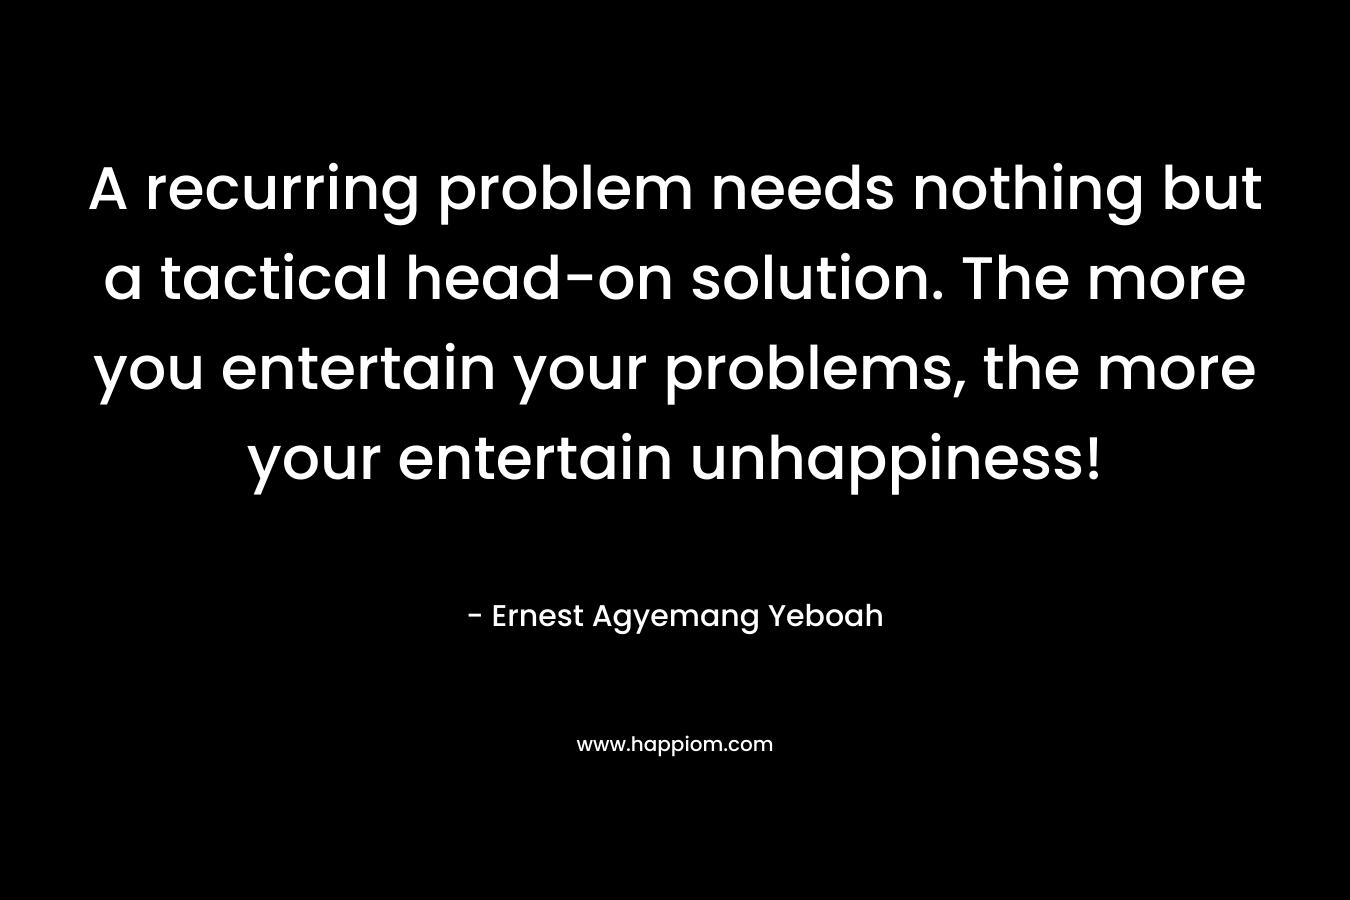 A recurring problem needs nothing but a tactical head-on solution. The more you entertain your problems, the more your entertain unhappiness!